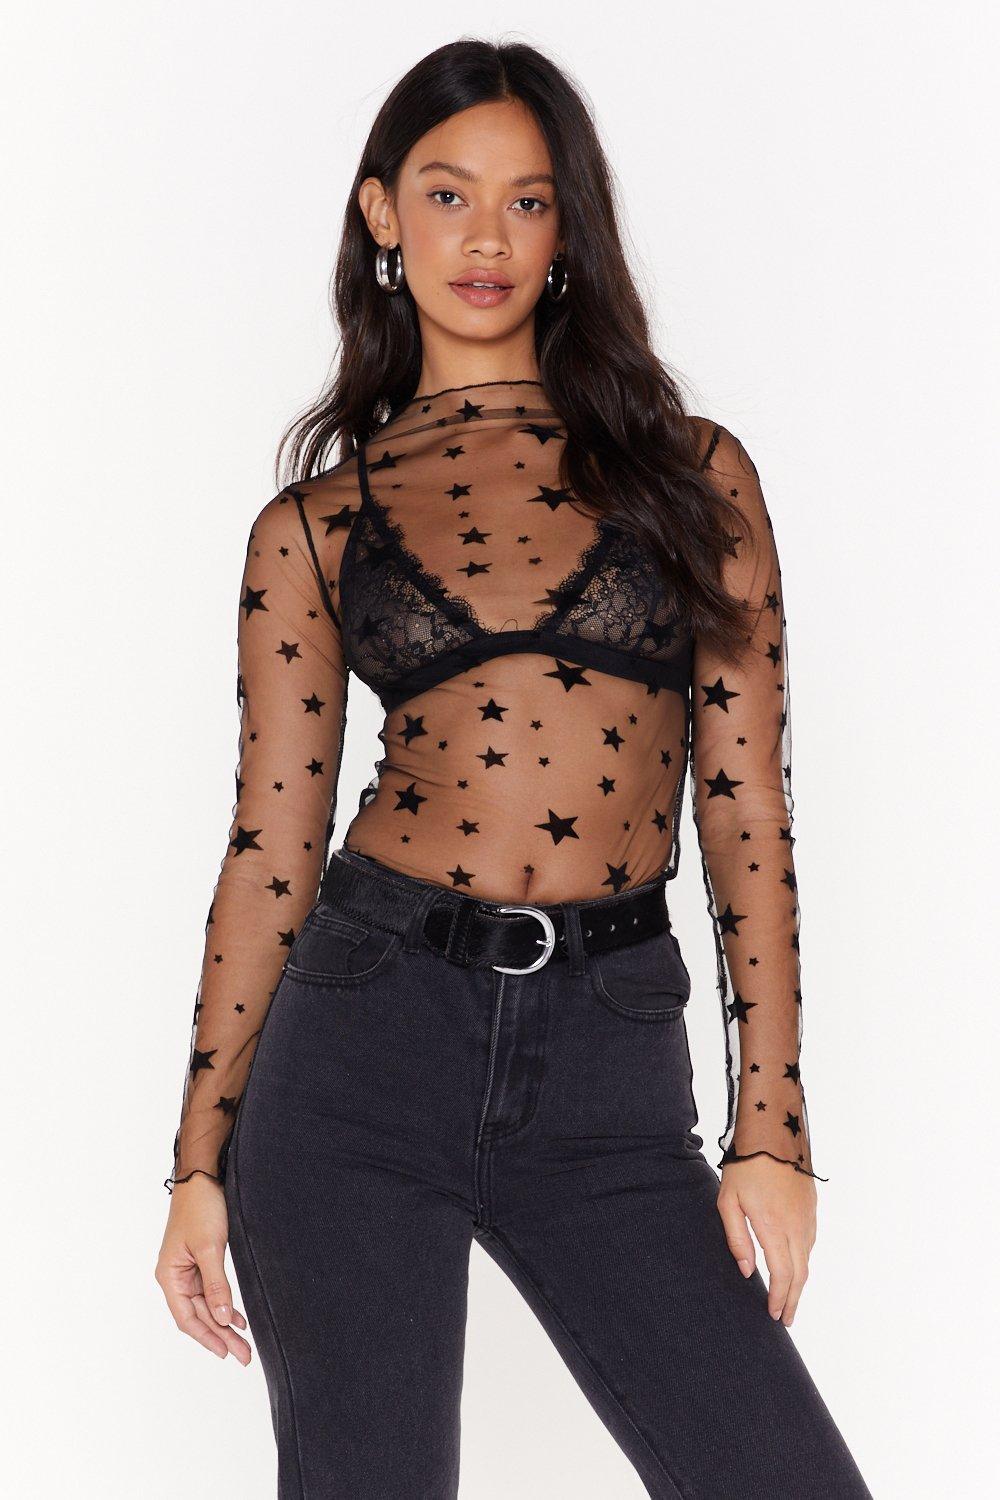 sheer top with stars